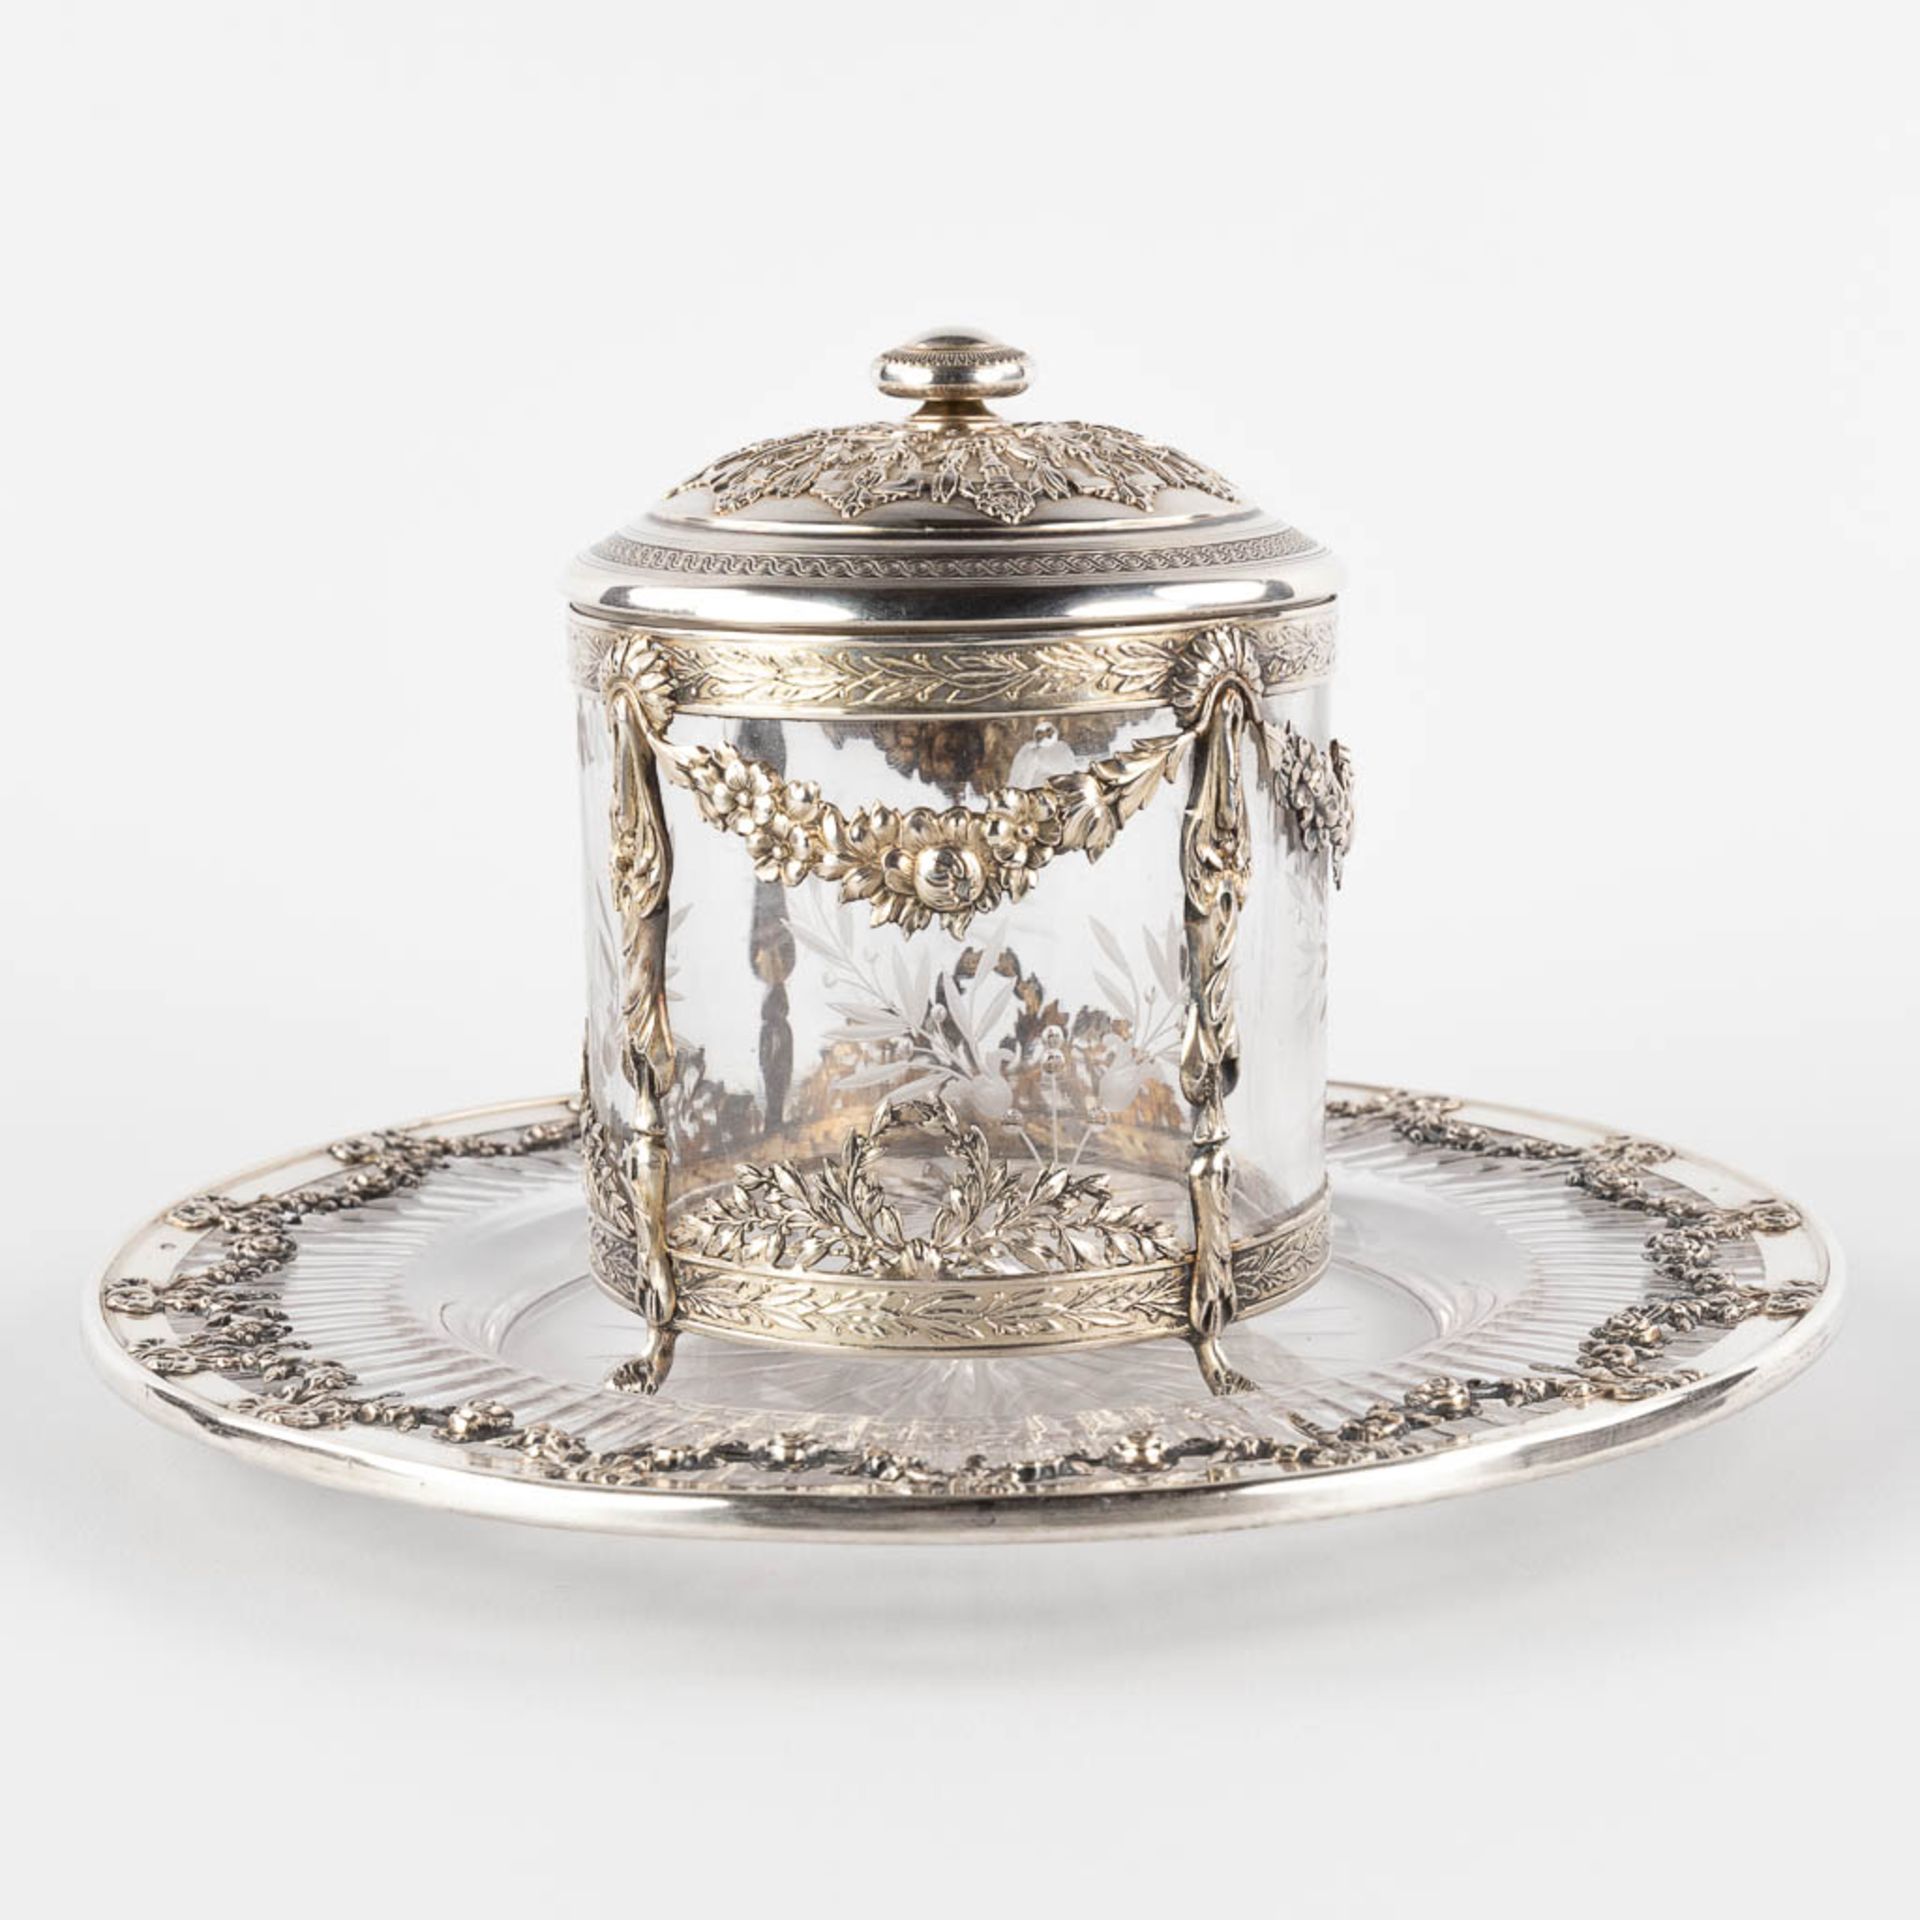 A small storage jar, glass mounted with silver, decorated with garlands. France. (H:13 x D:11,5 cm) - Image 3 of 15